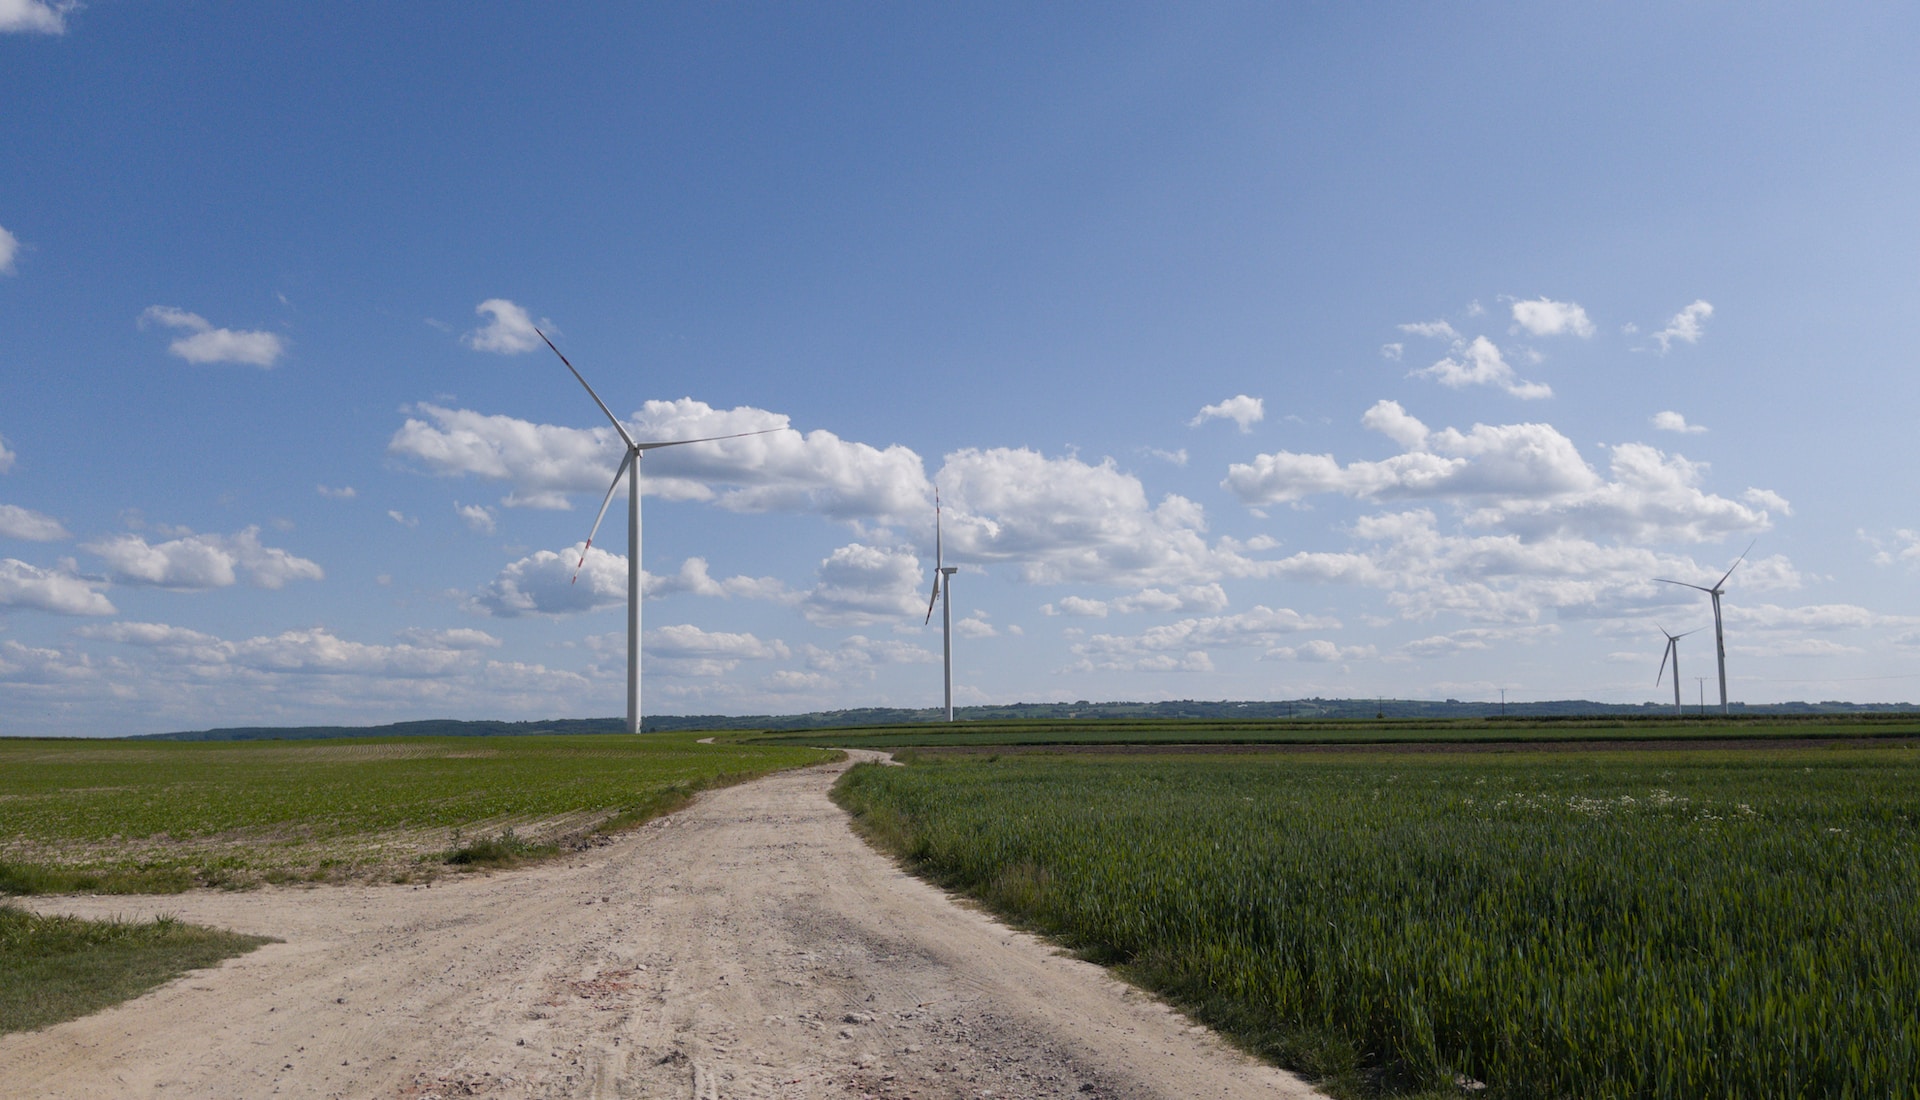 a dirt road going through a field with windmills in the background